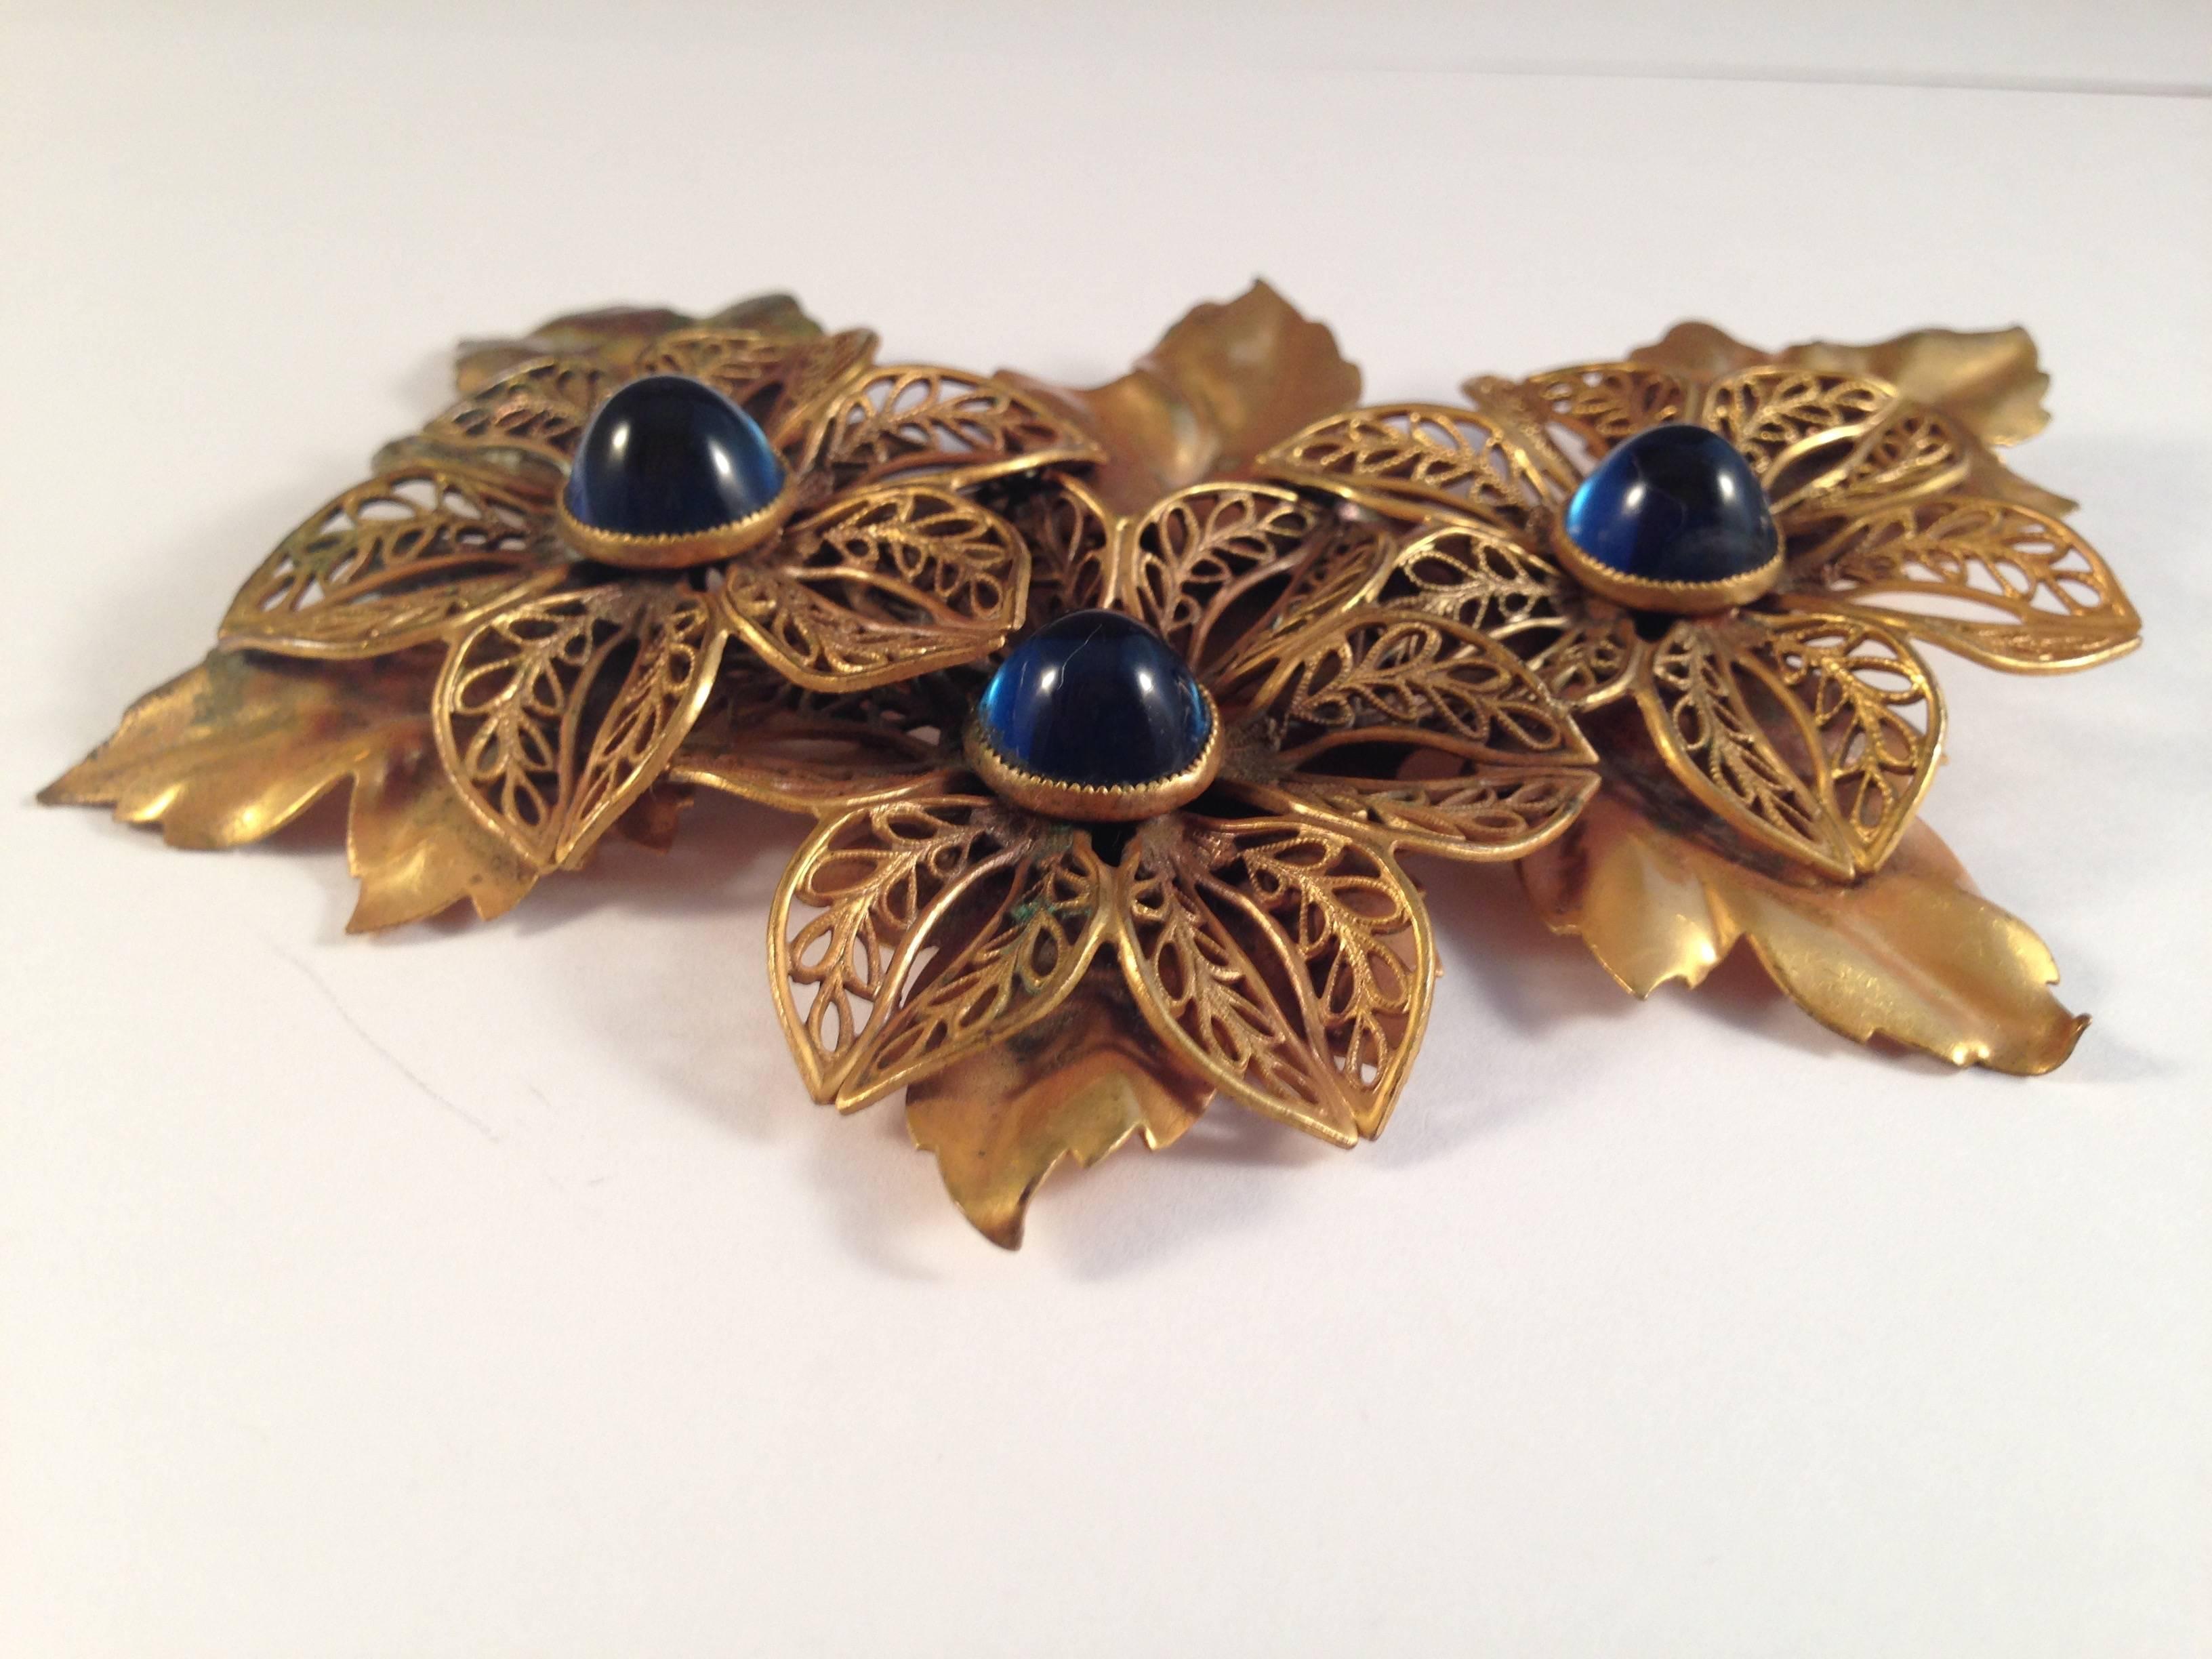 This is a large gold-tone 1940s Joseff of Hollywood brooch with blue glass floral centers.  It measures 4" long and 3" tall. The brooch is in good vintage condition. There is wear to the finish on the leaf on the upper right hand side of